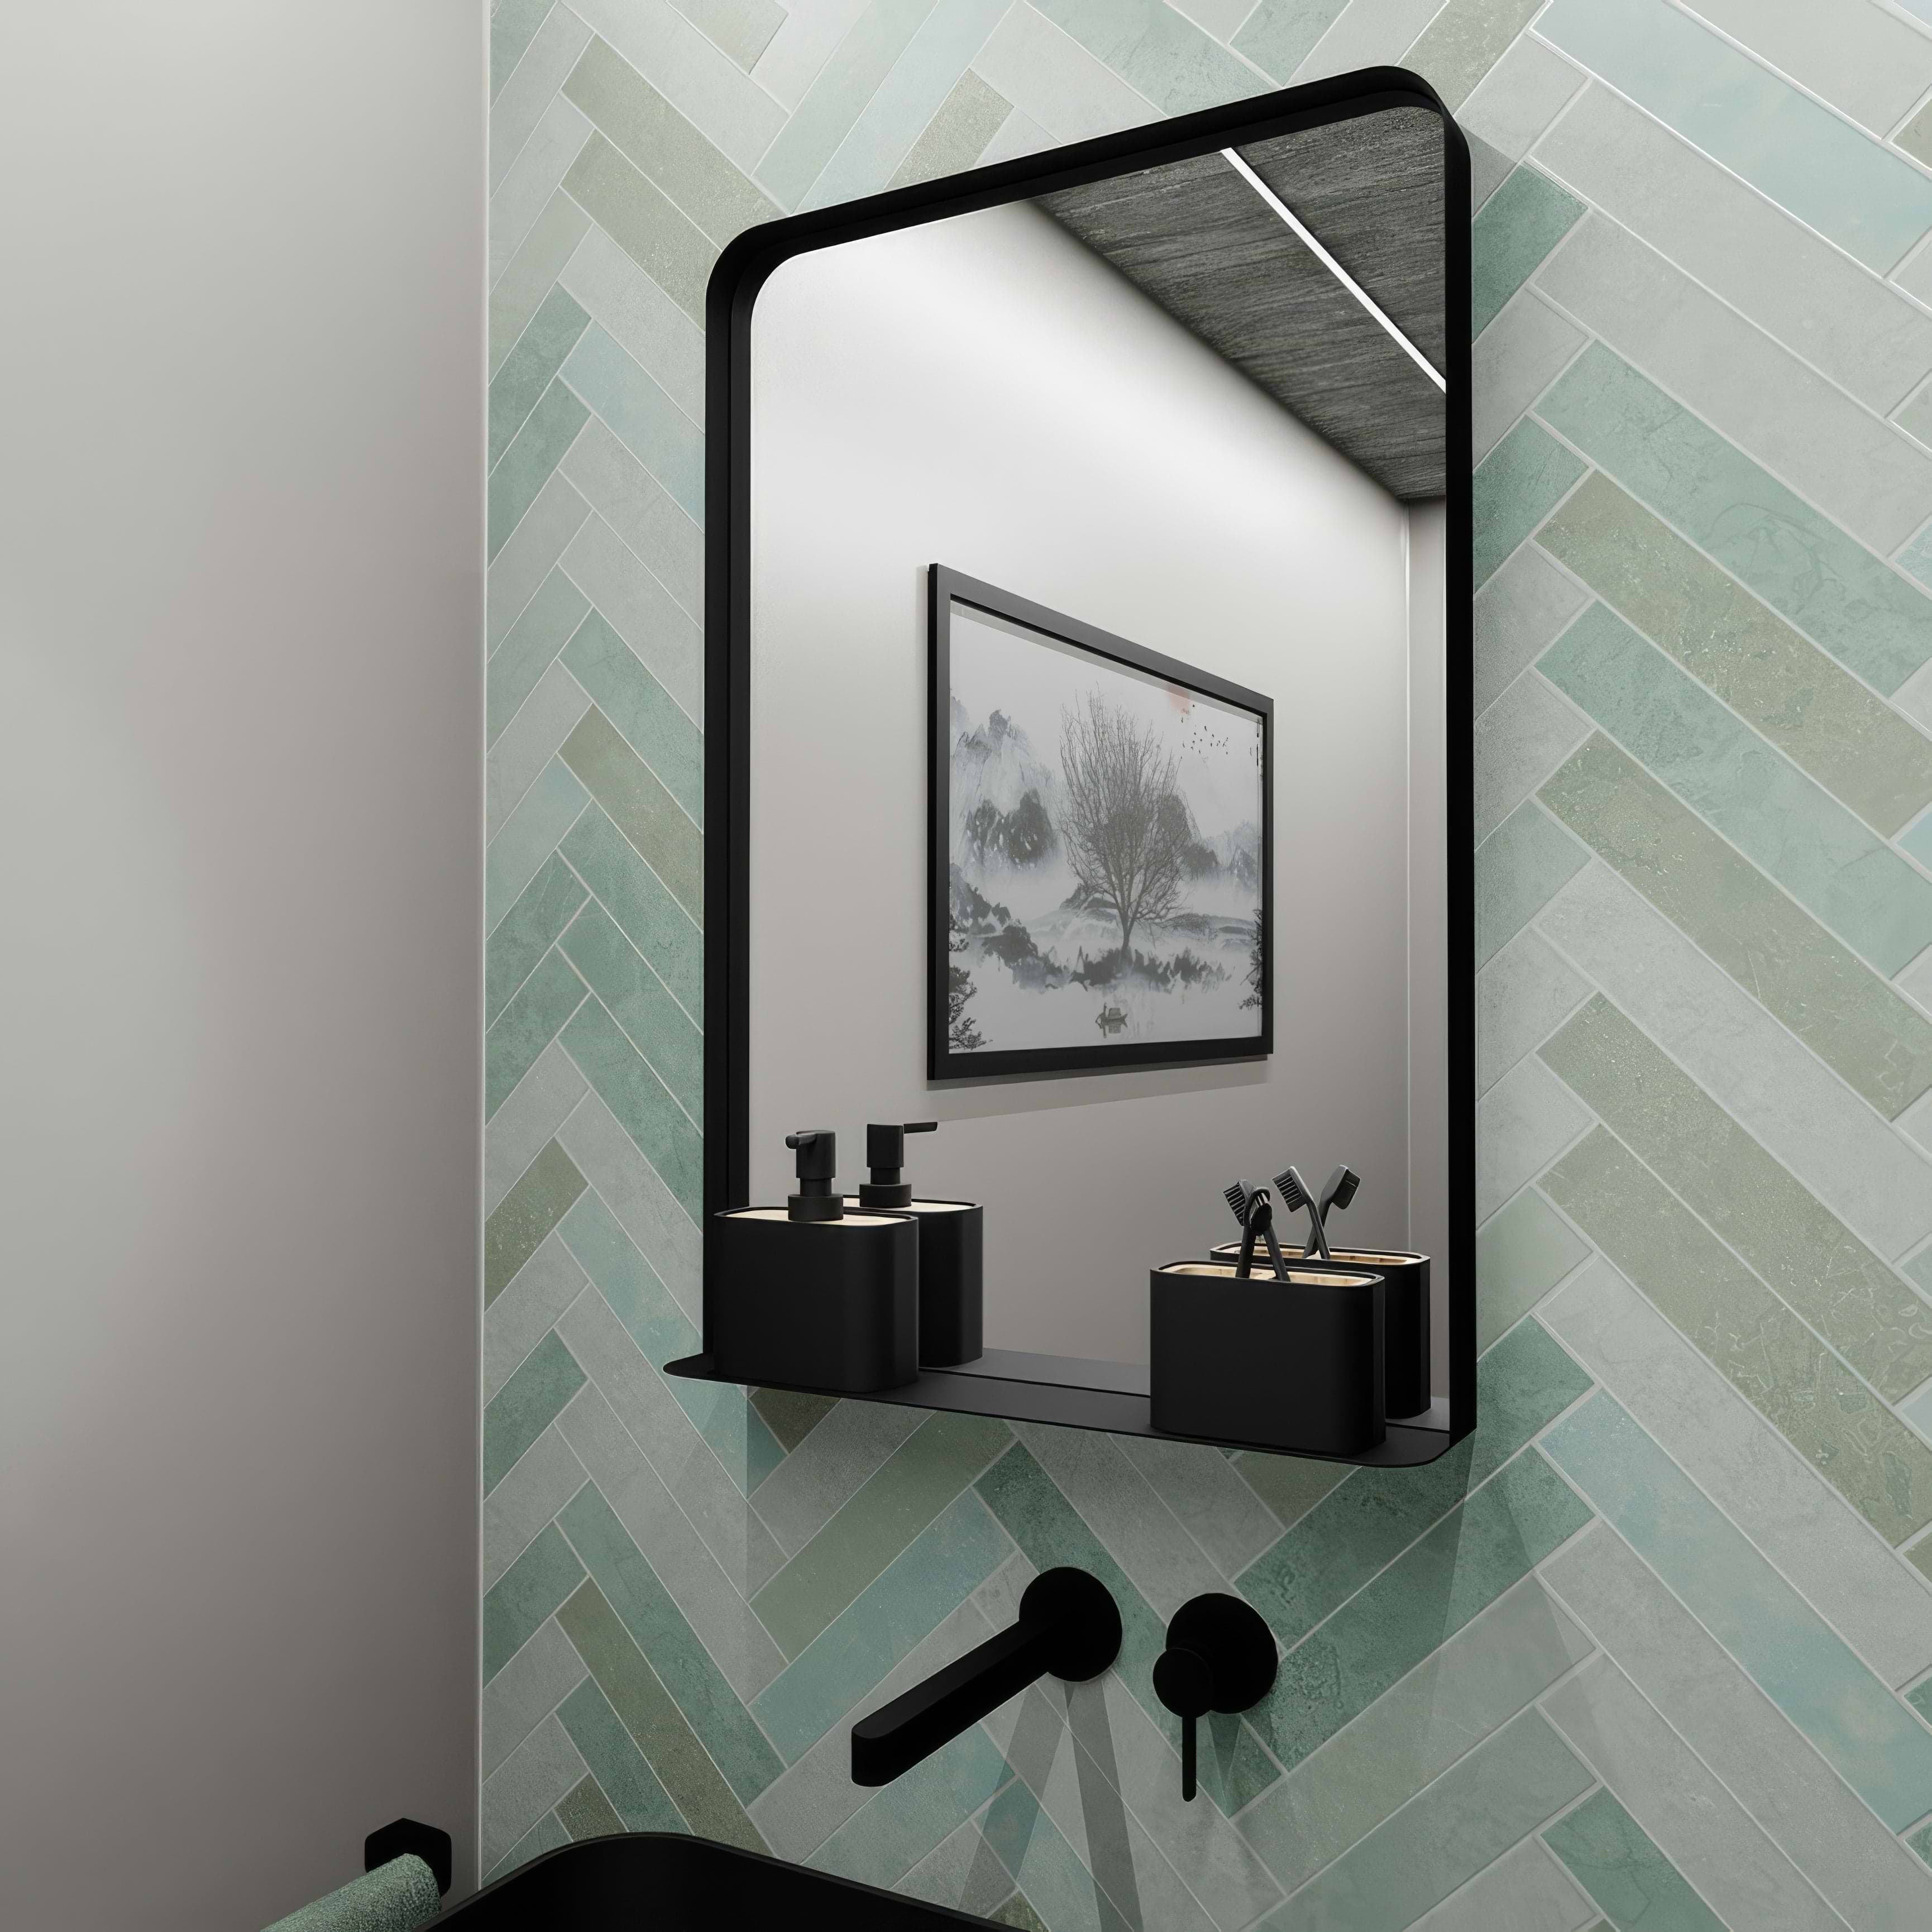 City Mirror with Shelf 50 Black - Hyperion Tiles